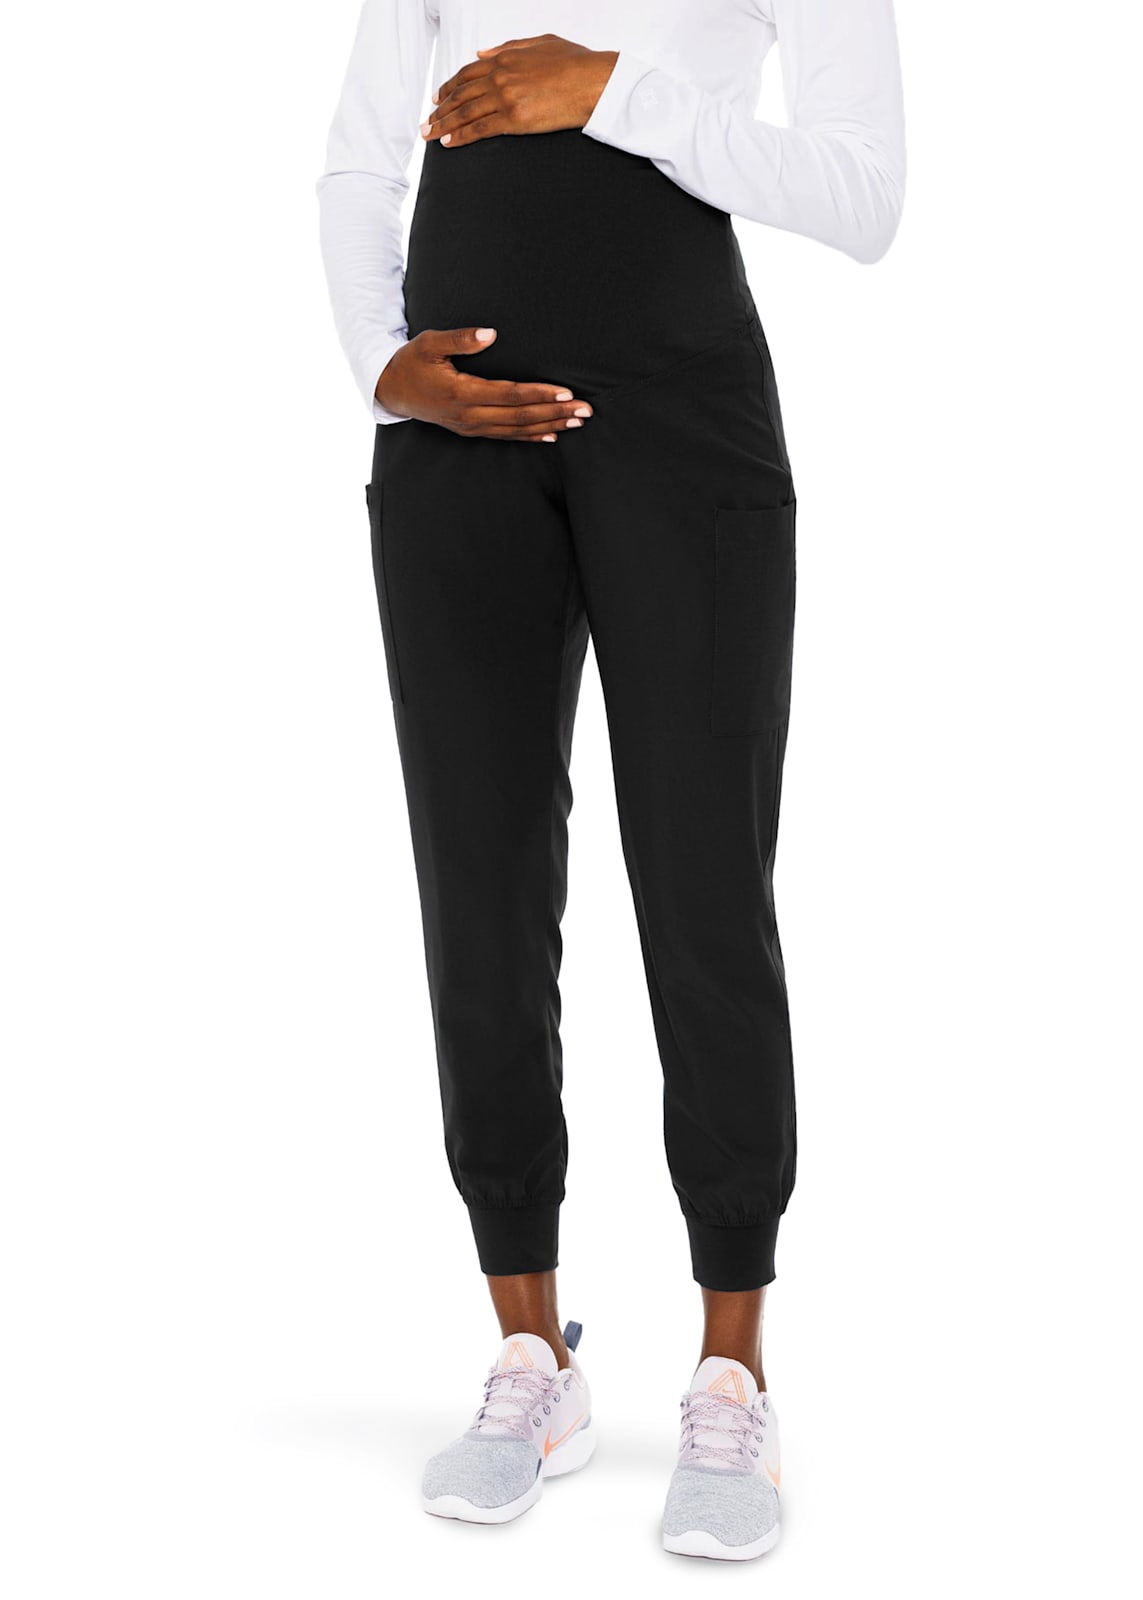 Med Couture Plus One Maternity Cargo Jogger Scrub Pants, Scrubs & Beyond